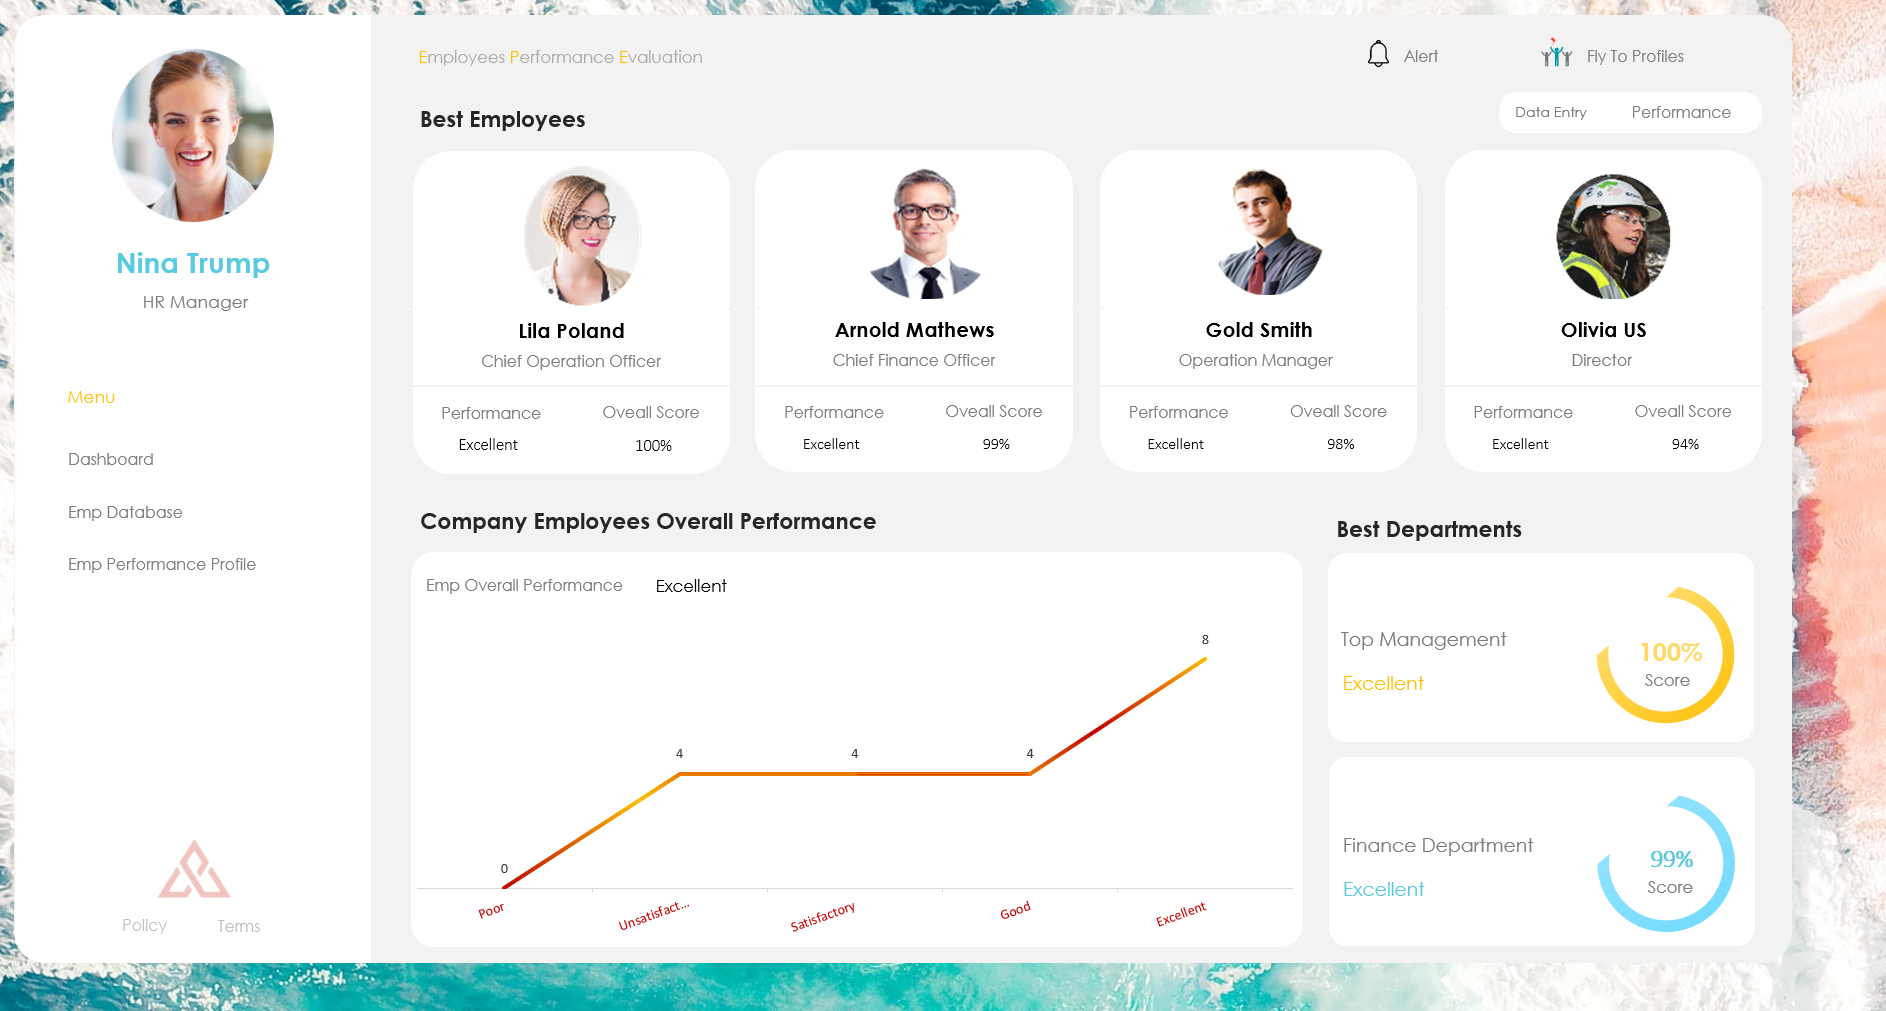 Employees Performance Evaluation Dashboard!